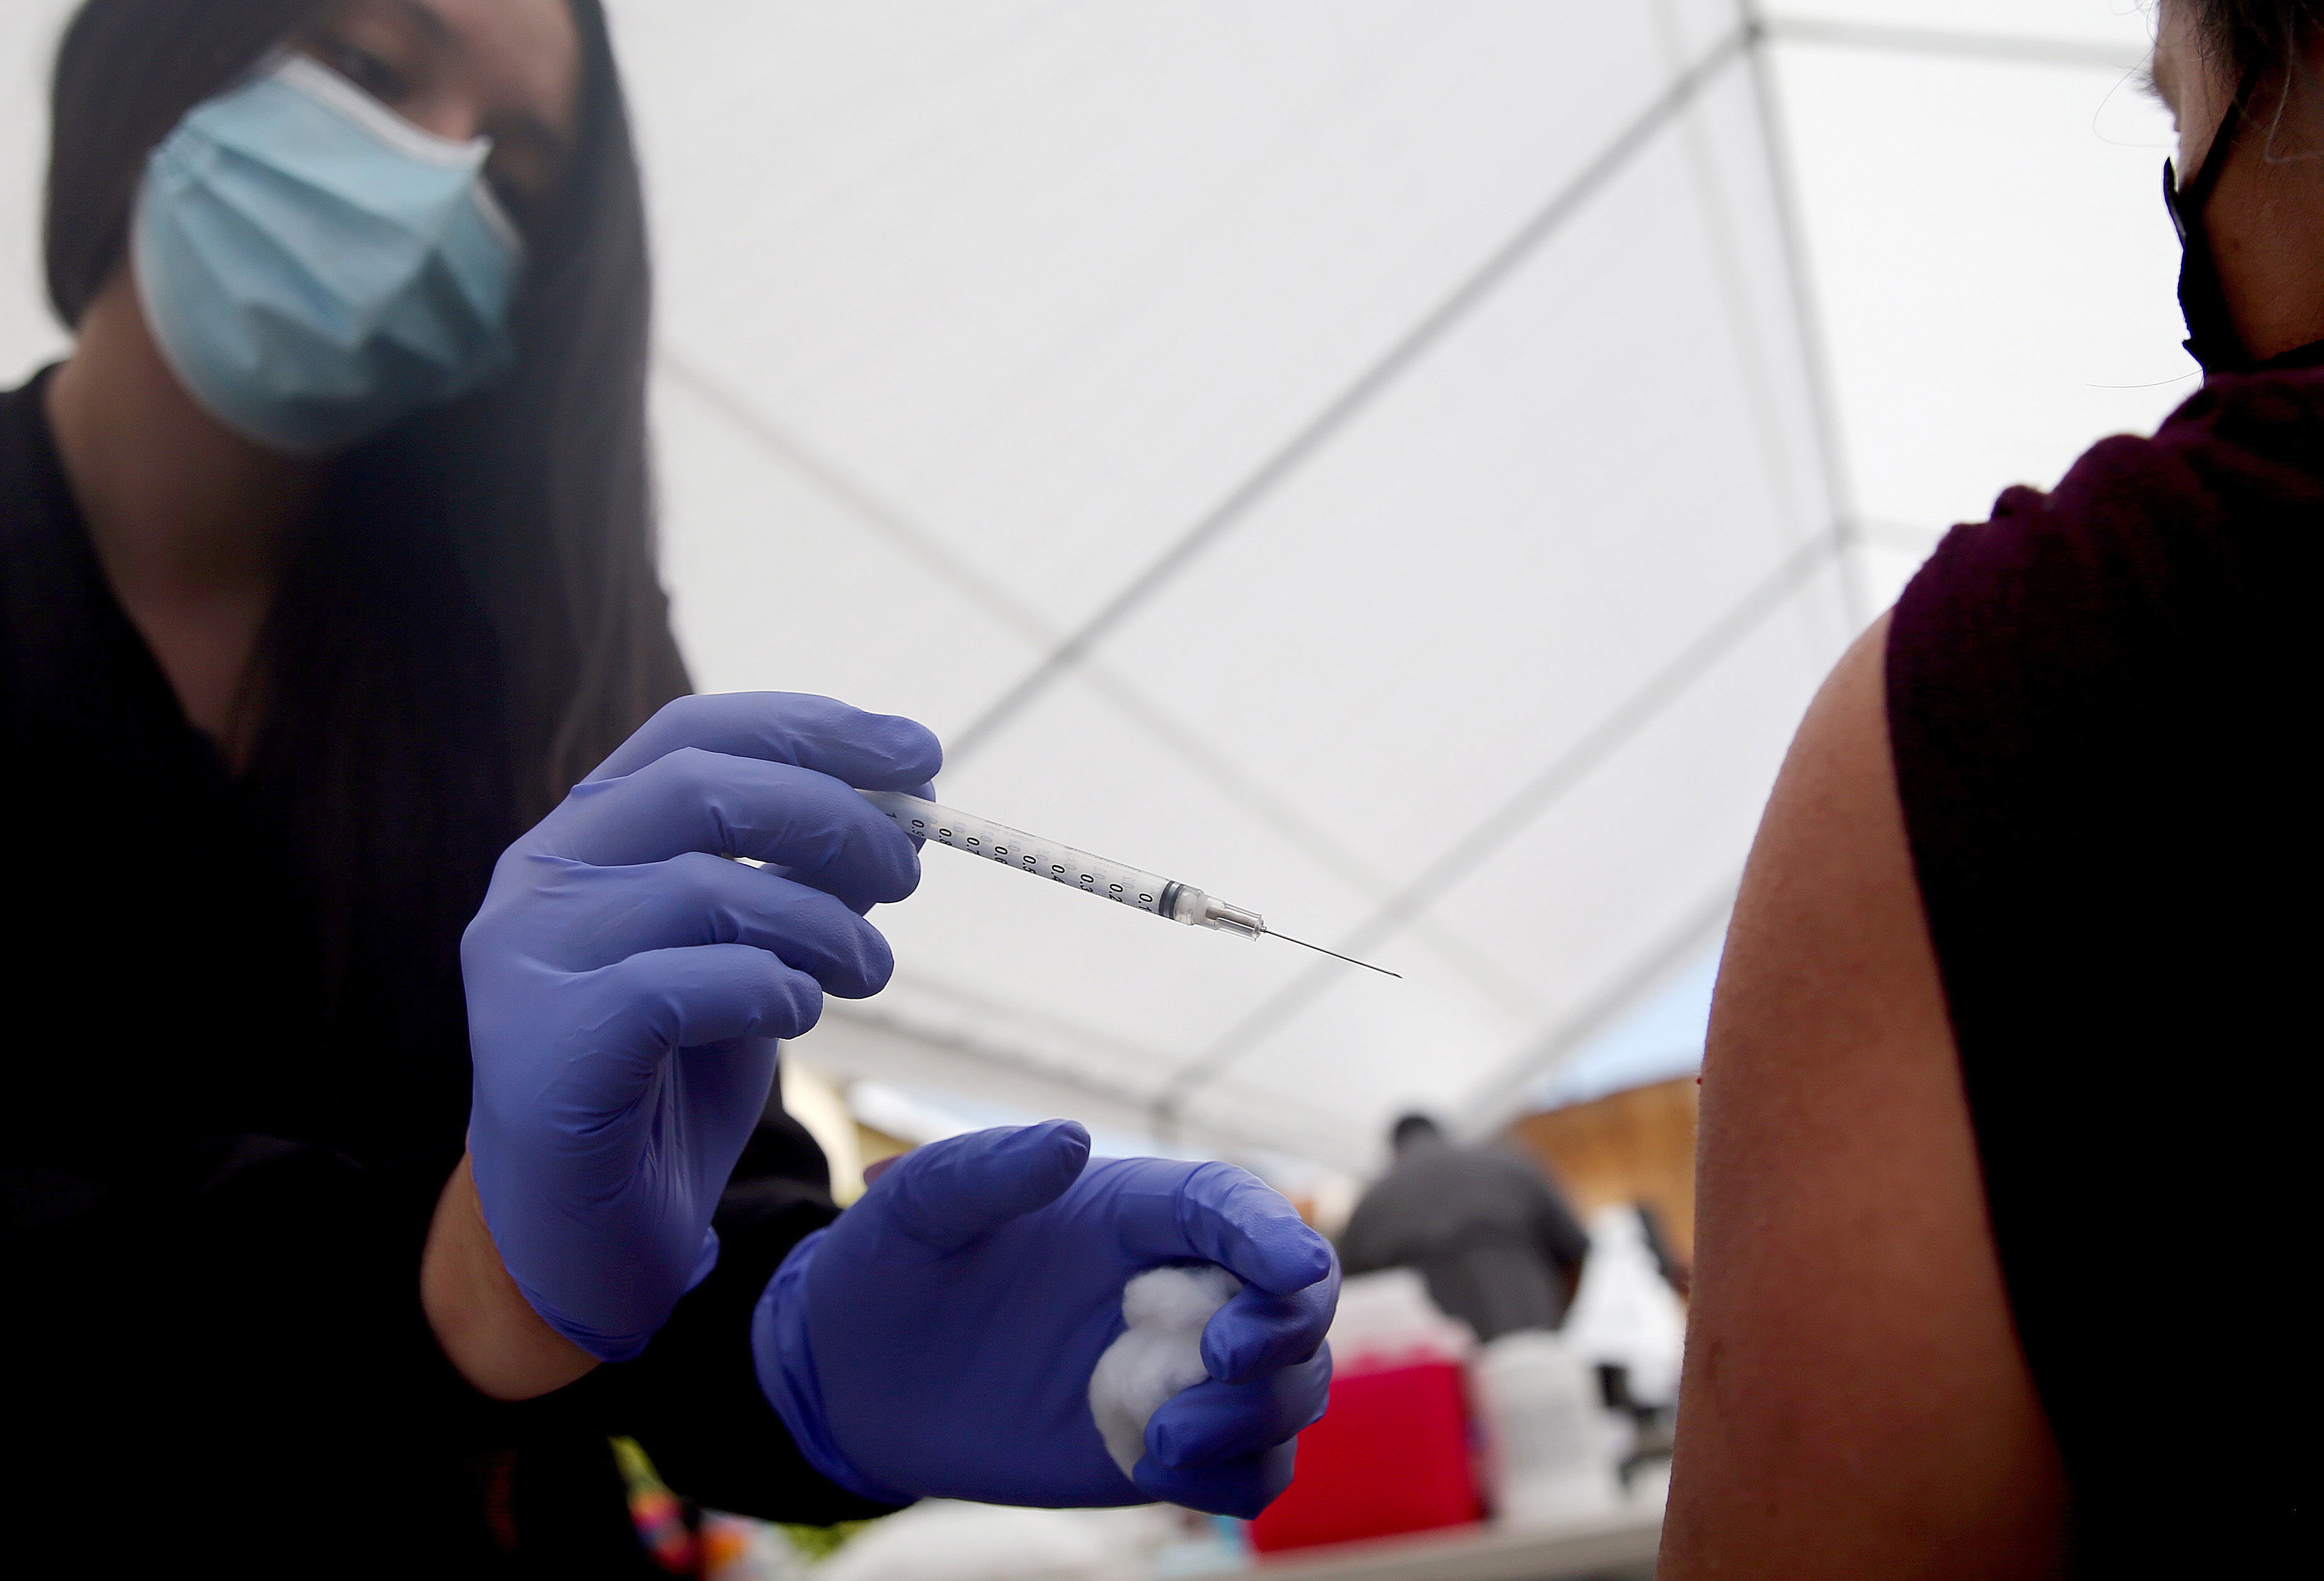 A health care worker administers a dose of the Pfizer COVID-19 vaccine at a clinic targeting Central American Indigenous residents at CIELO, an Indigenous rights organization, on April 10 in Los Angeles.